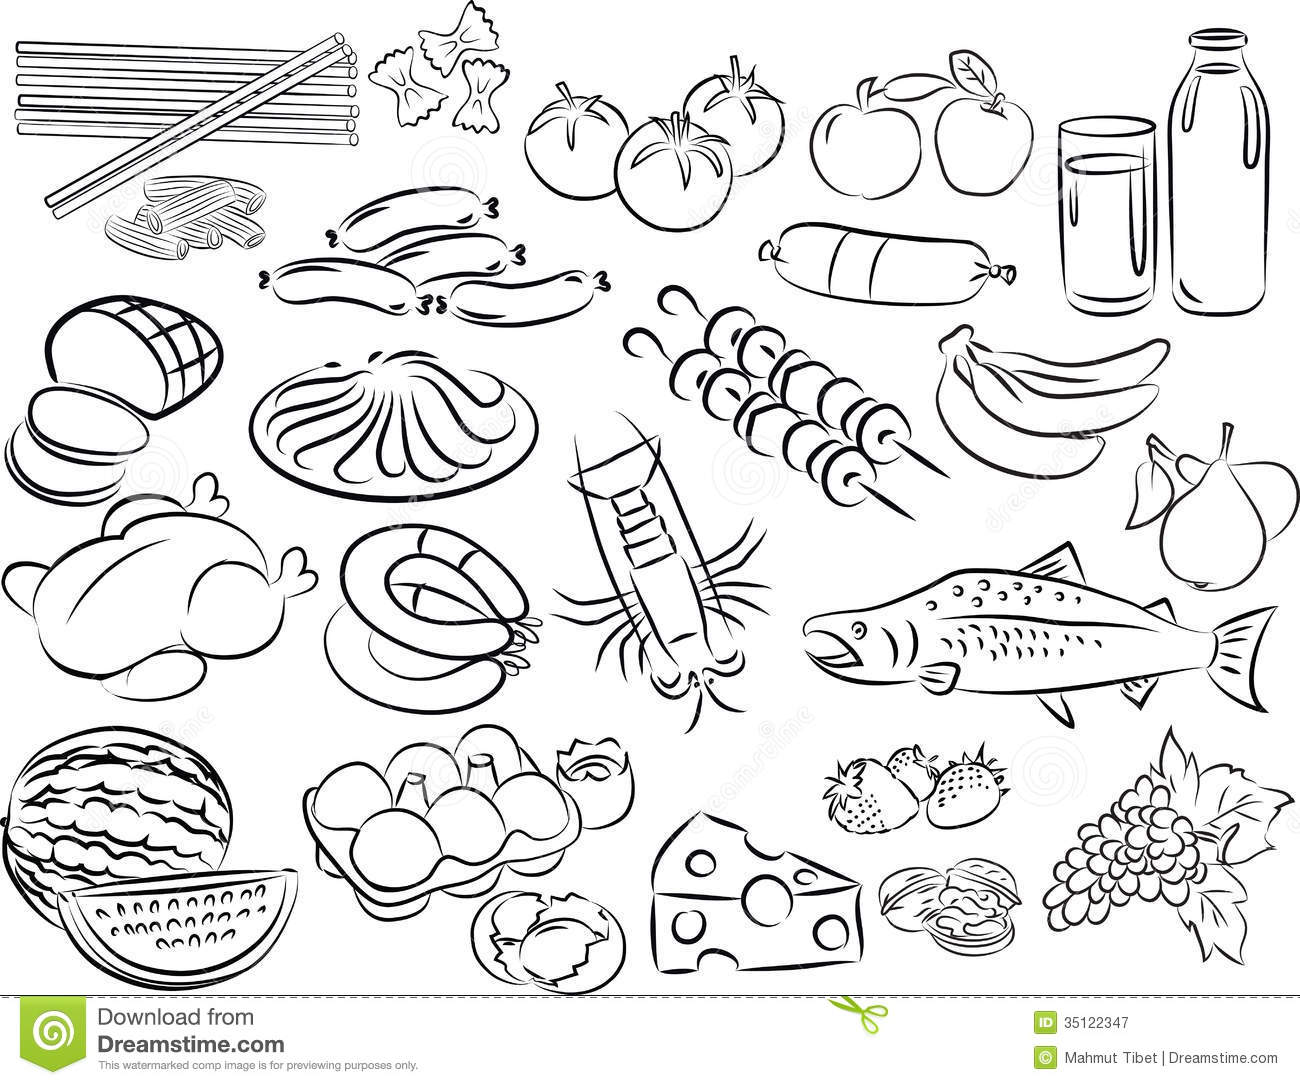 76 food clipart.